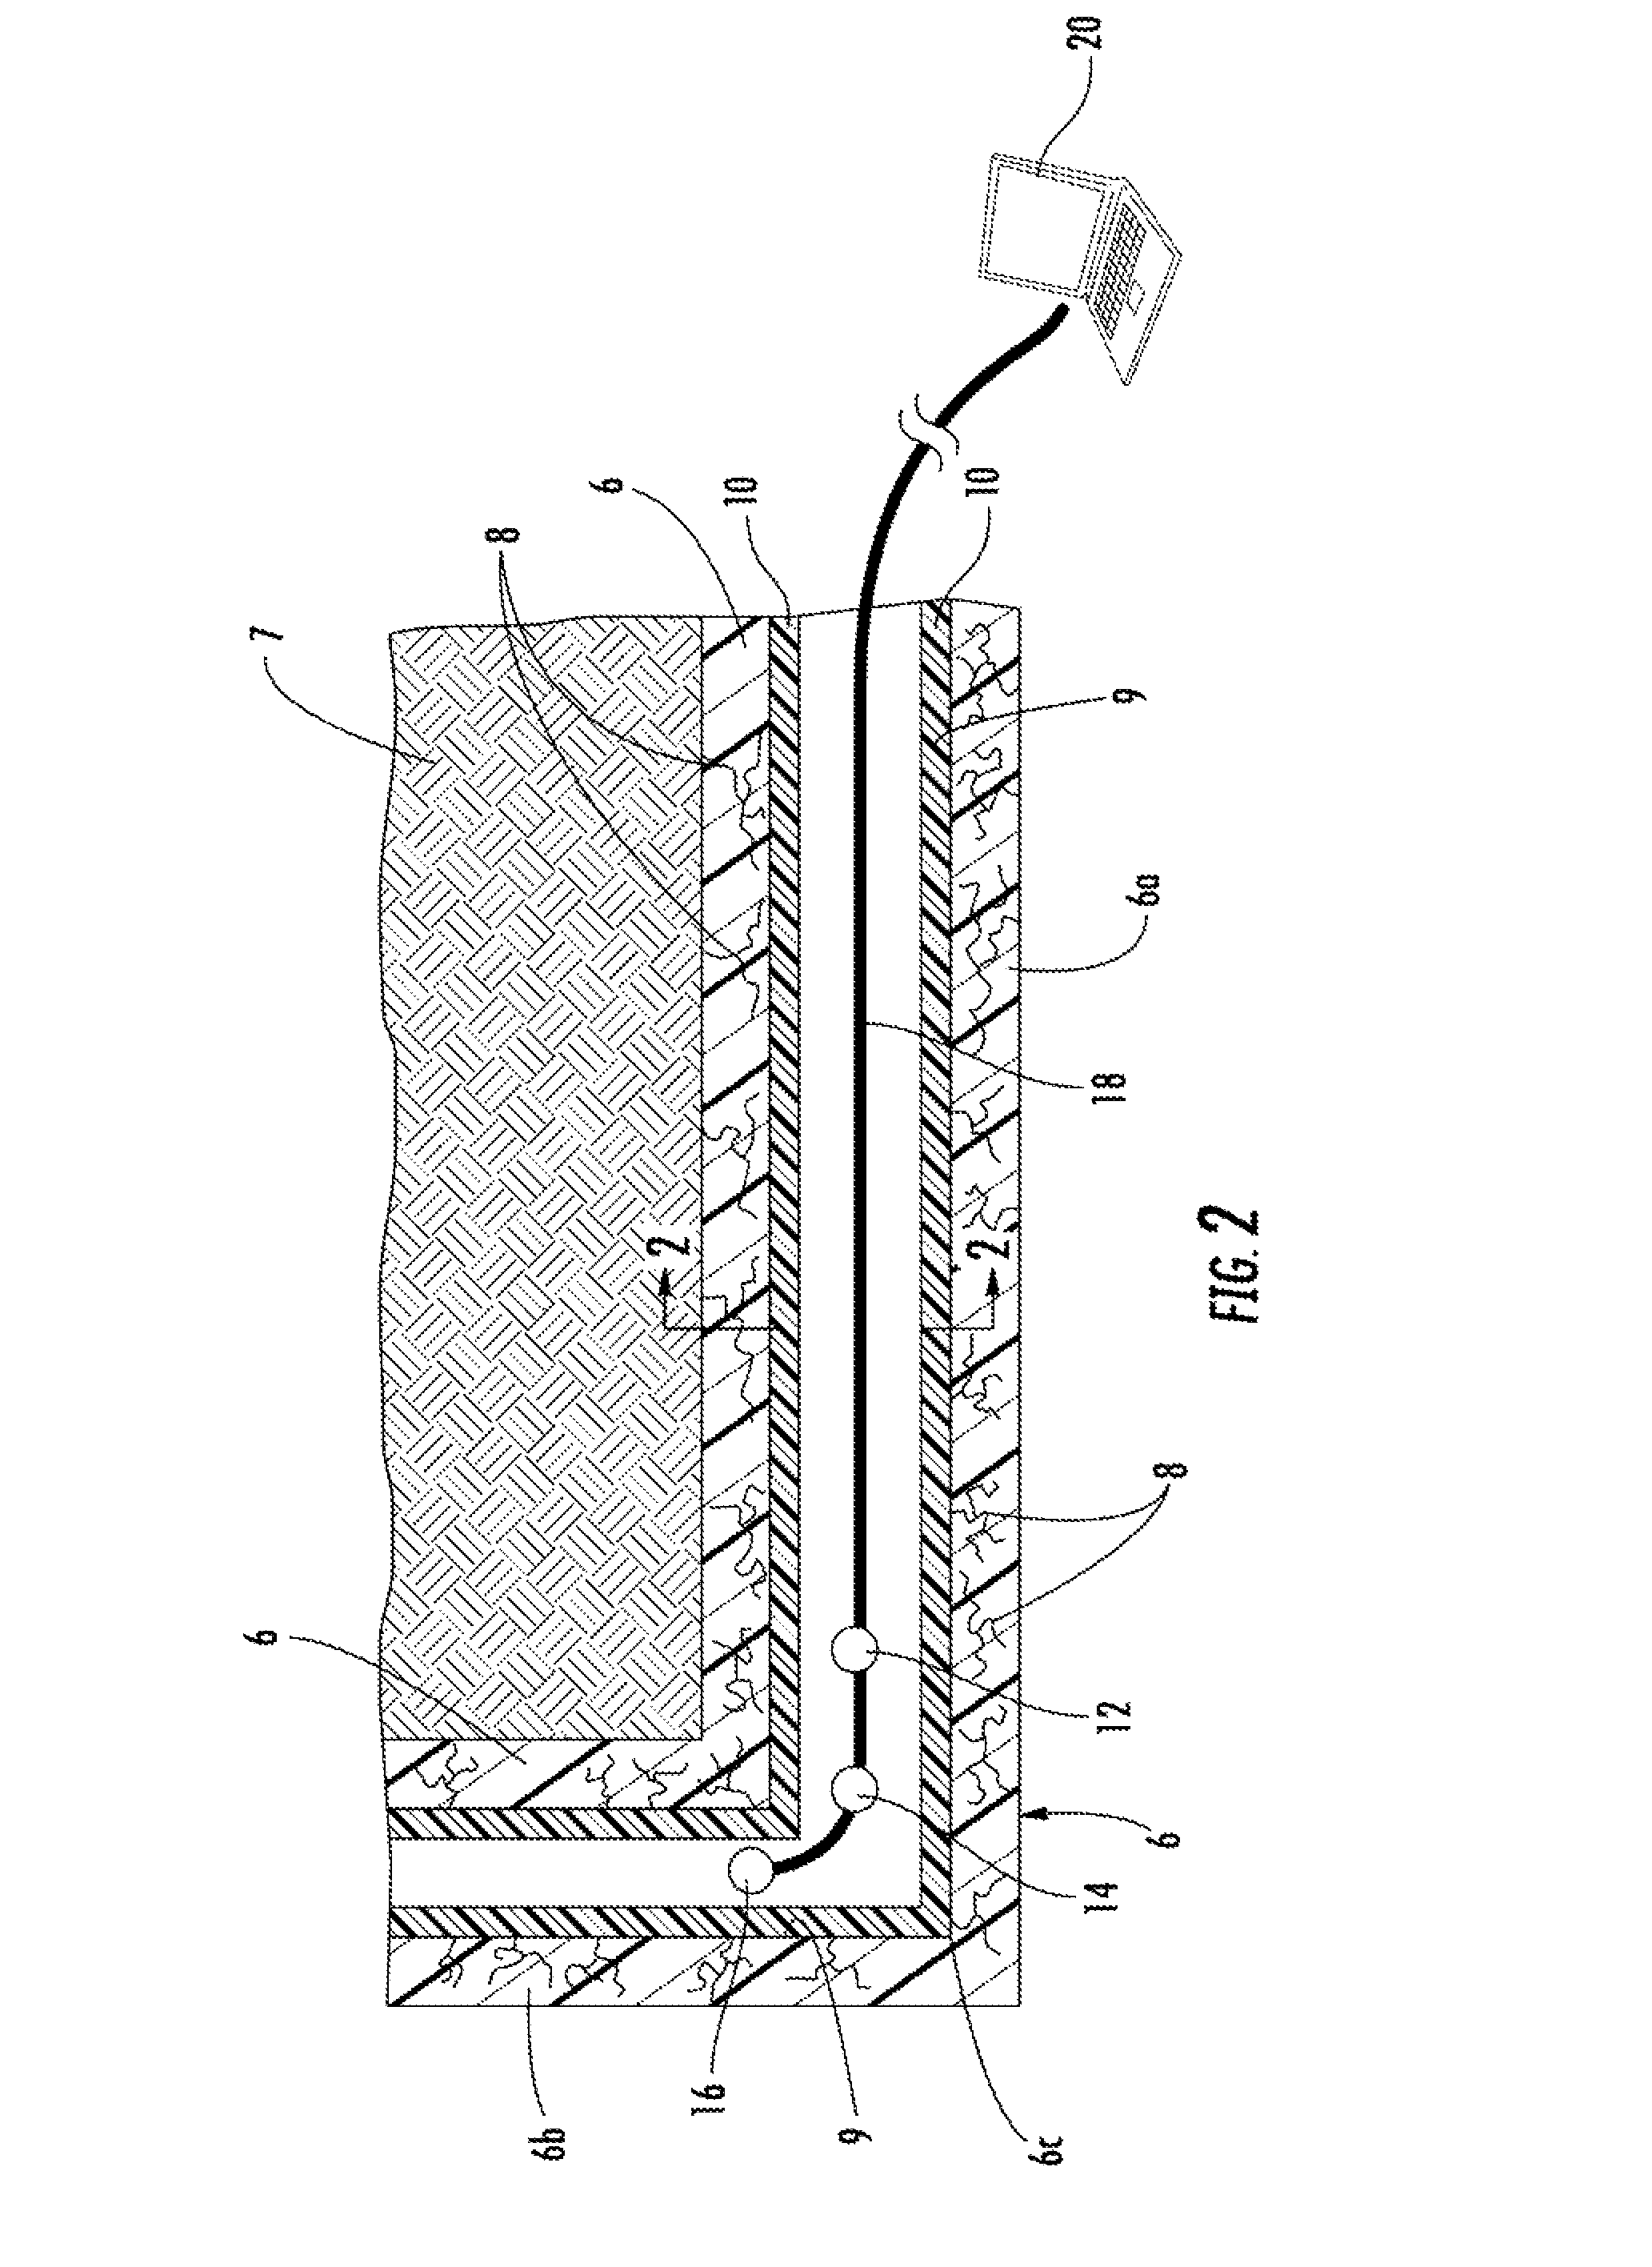 System for inspecting and coating the interior of a pipe